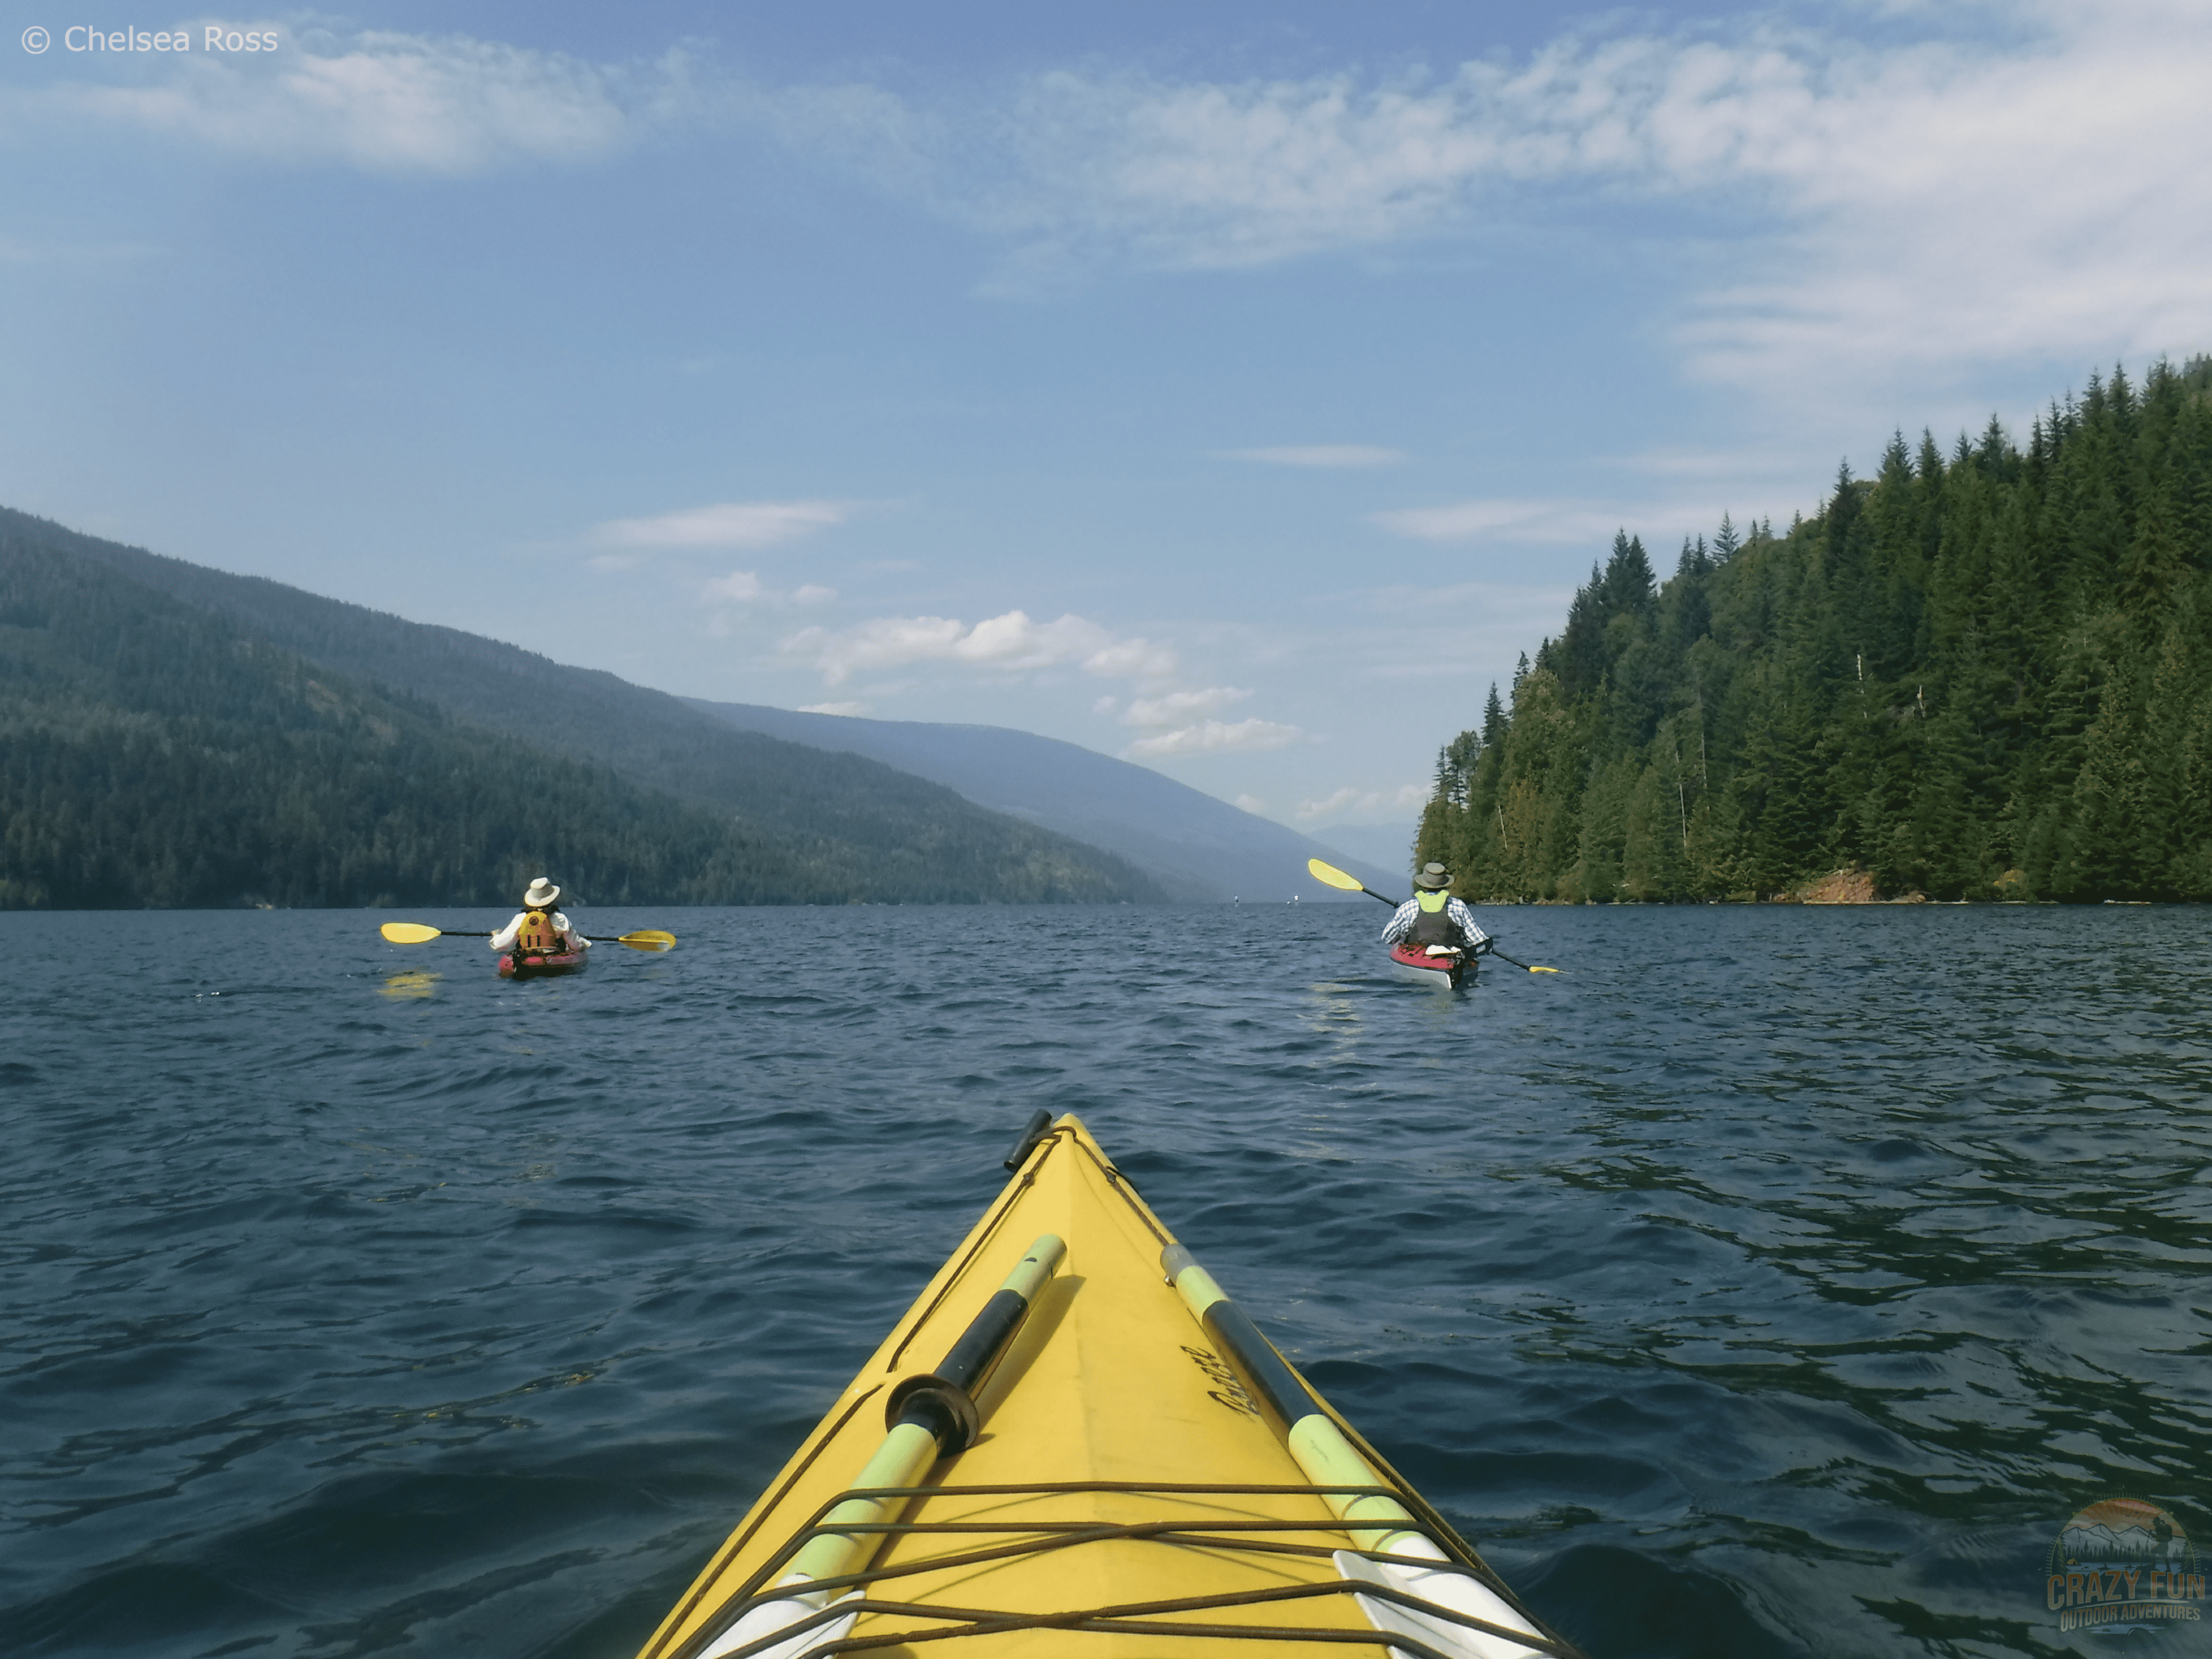 My parents are in front of me while we kayak on Lake Revelstoke.